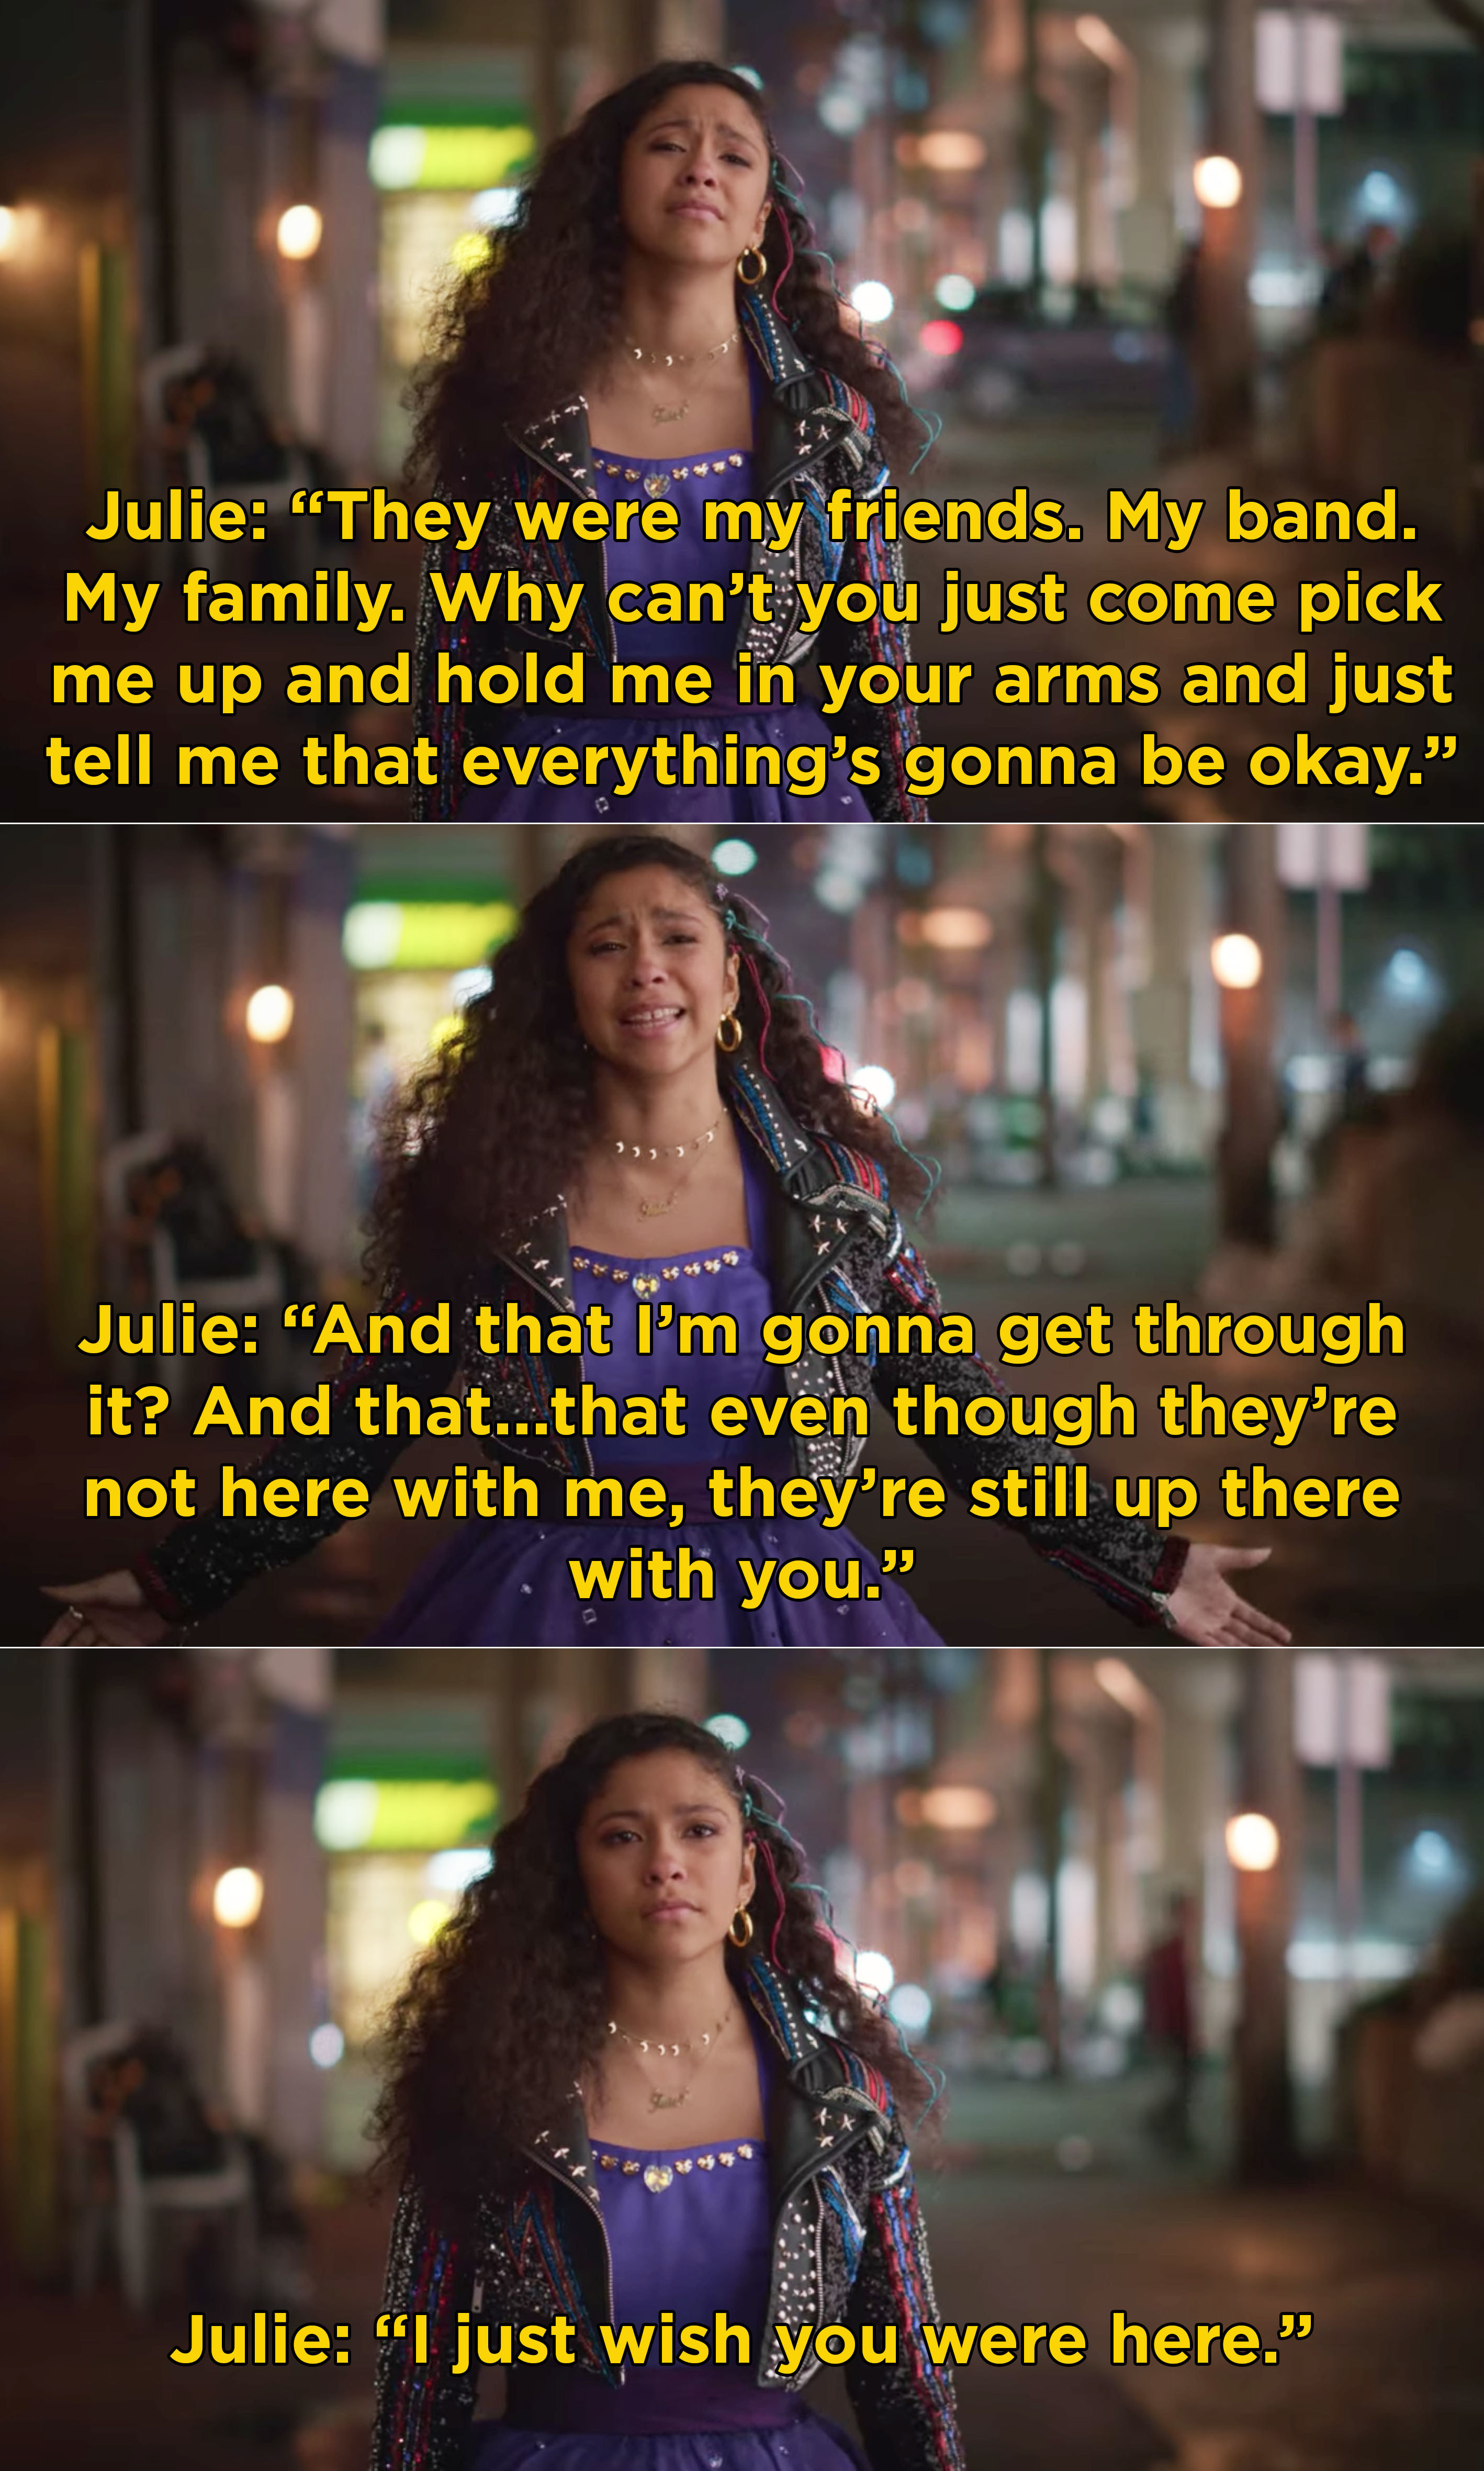 Julie talking to her mom and saying she wishes she could give her a sign that the band is with her right now